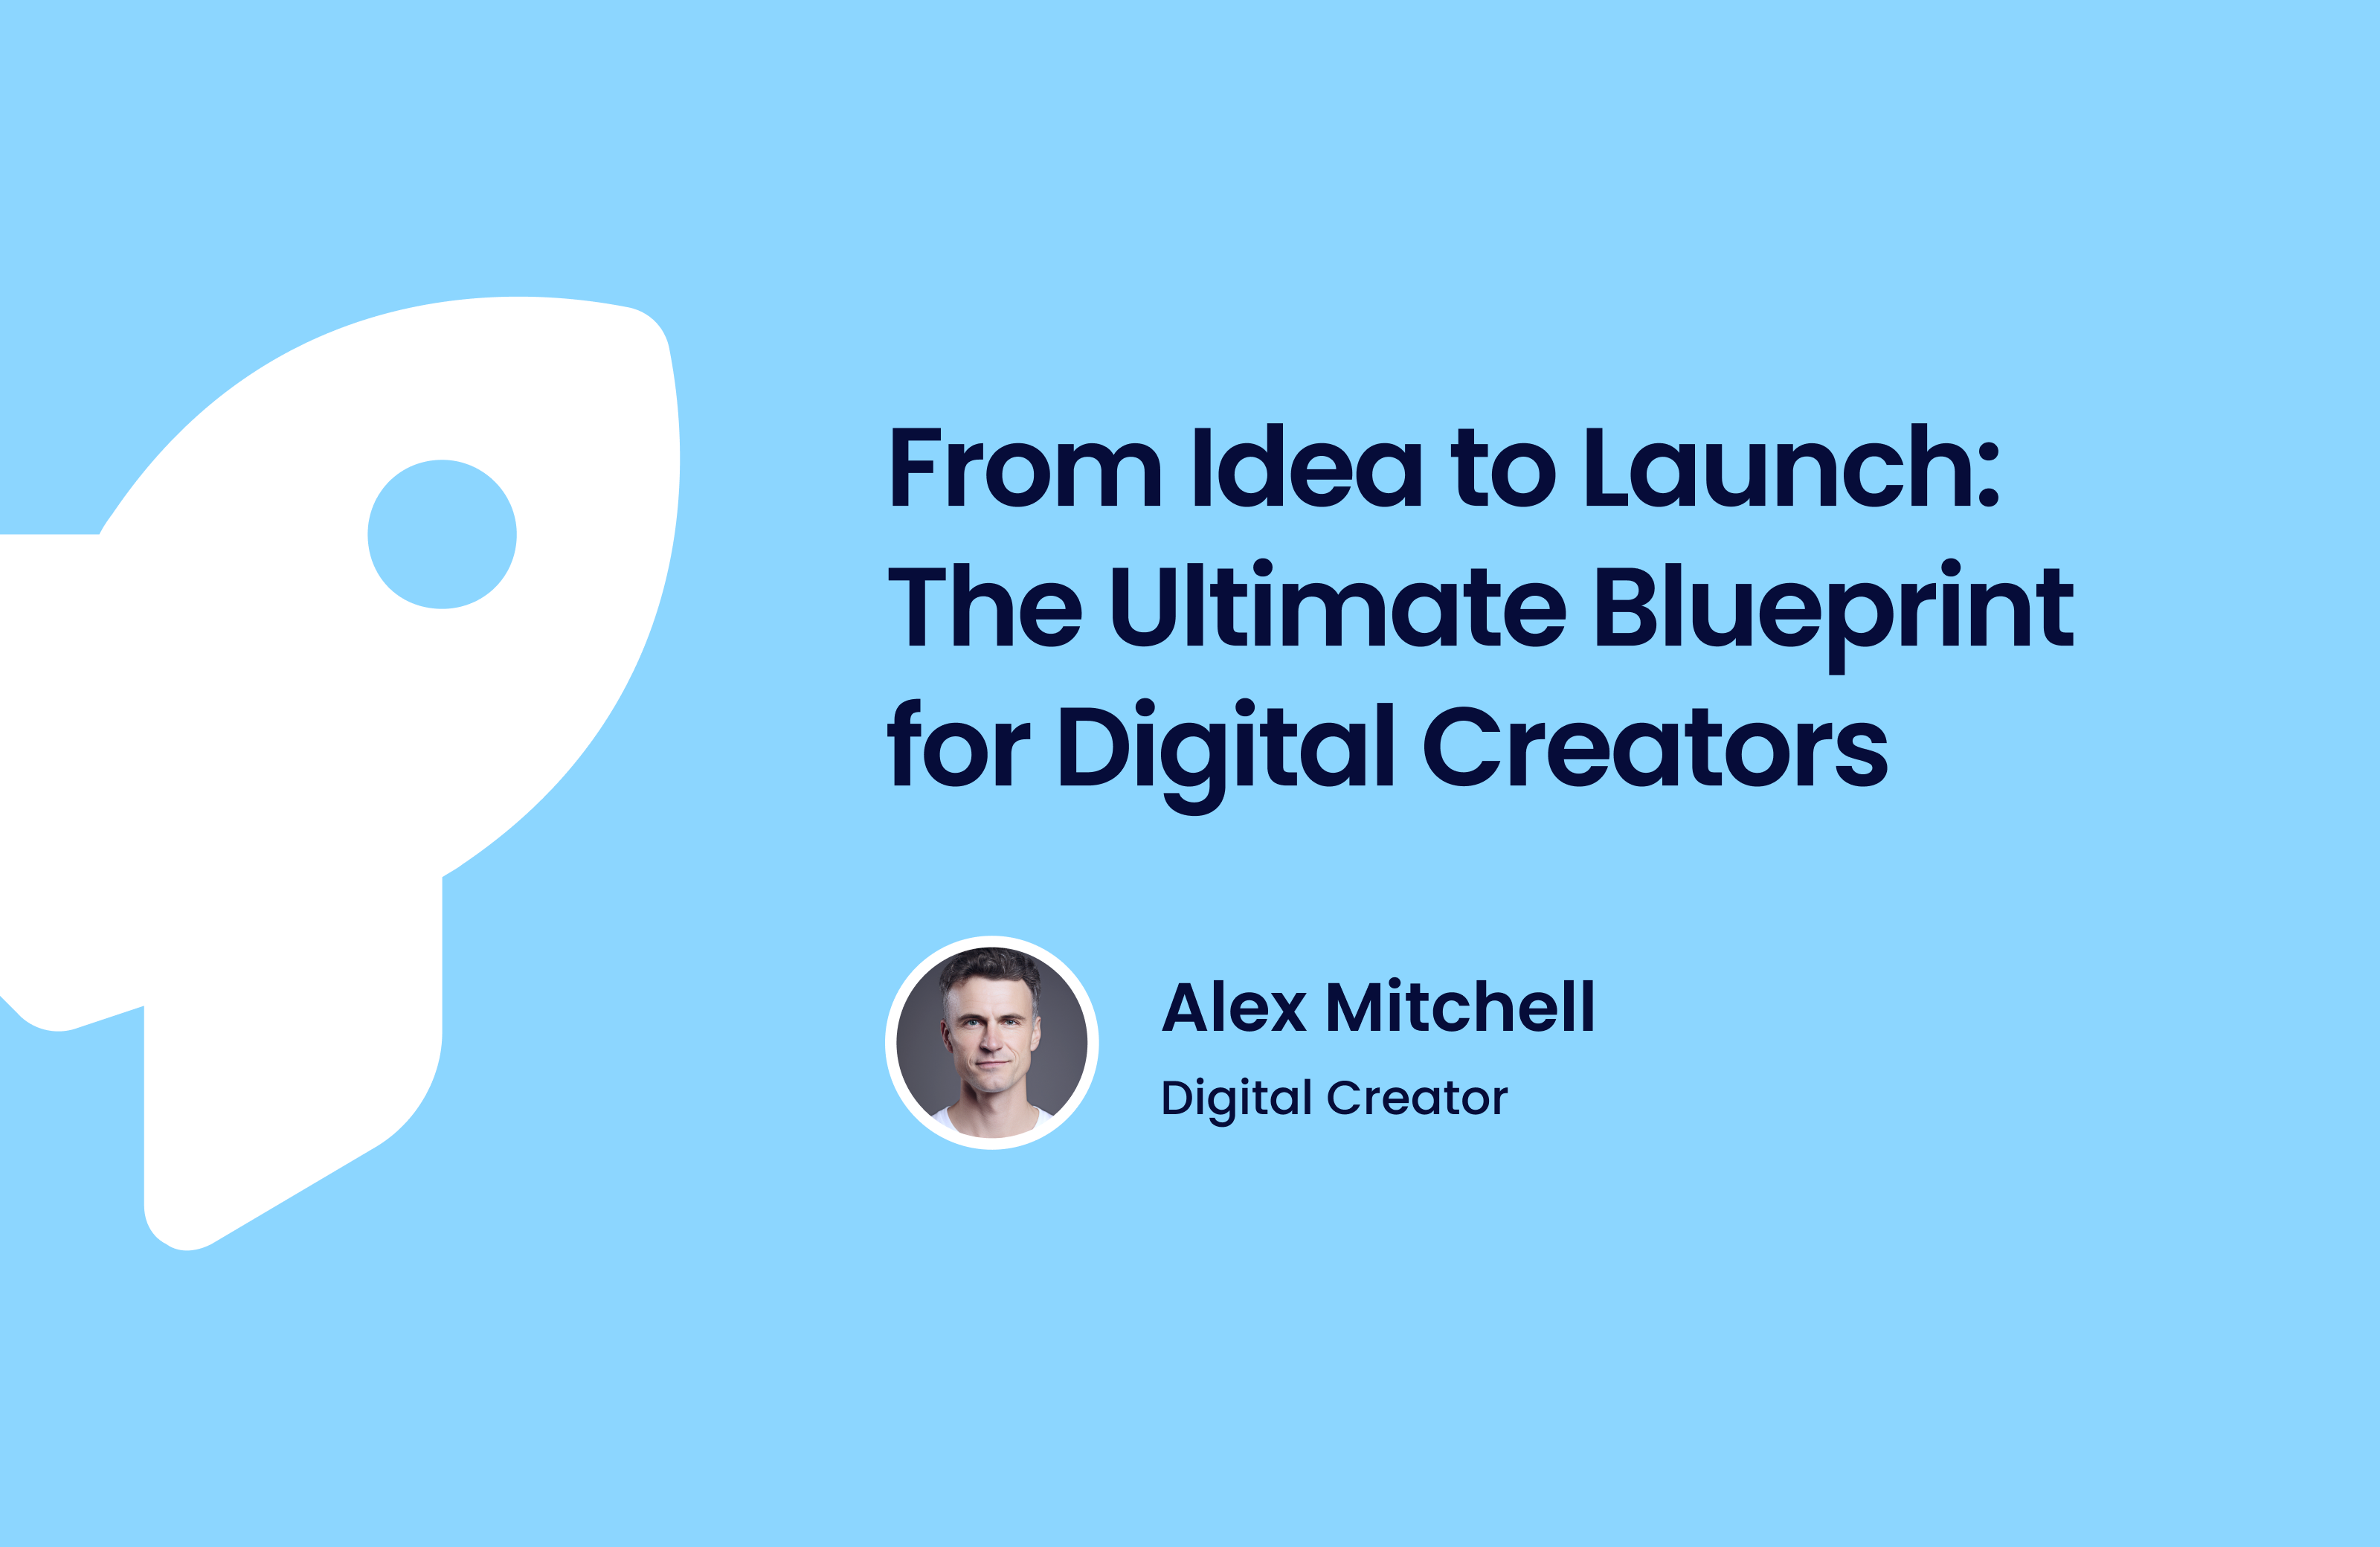 From Idea to Launch: The Ultimate Blueprint for Digital Creators